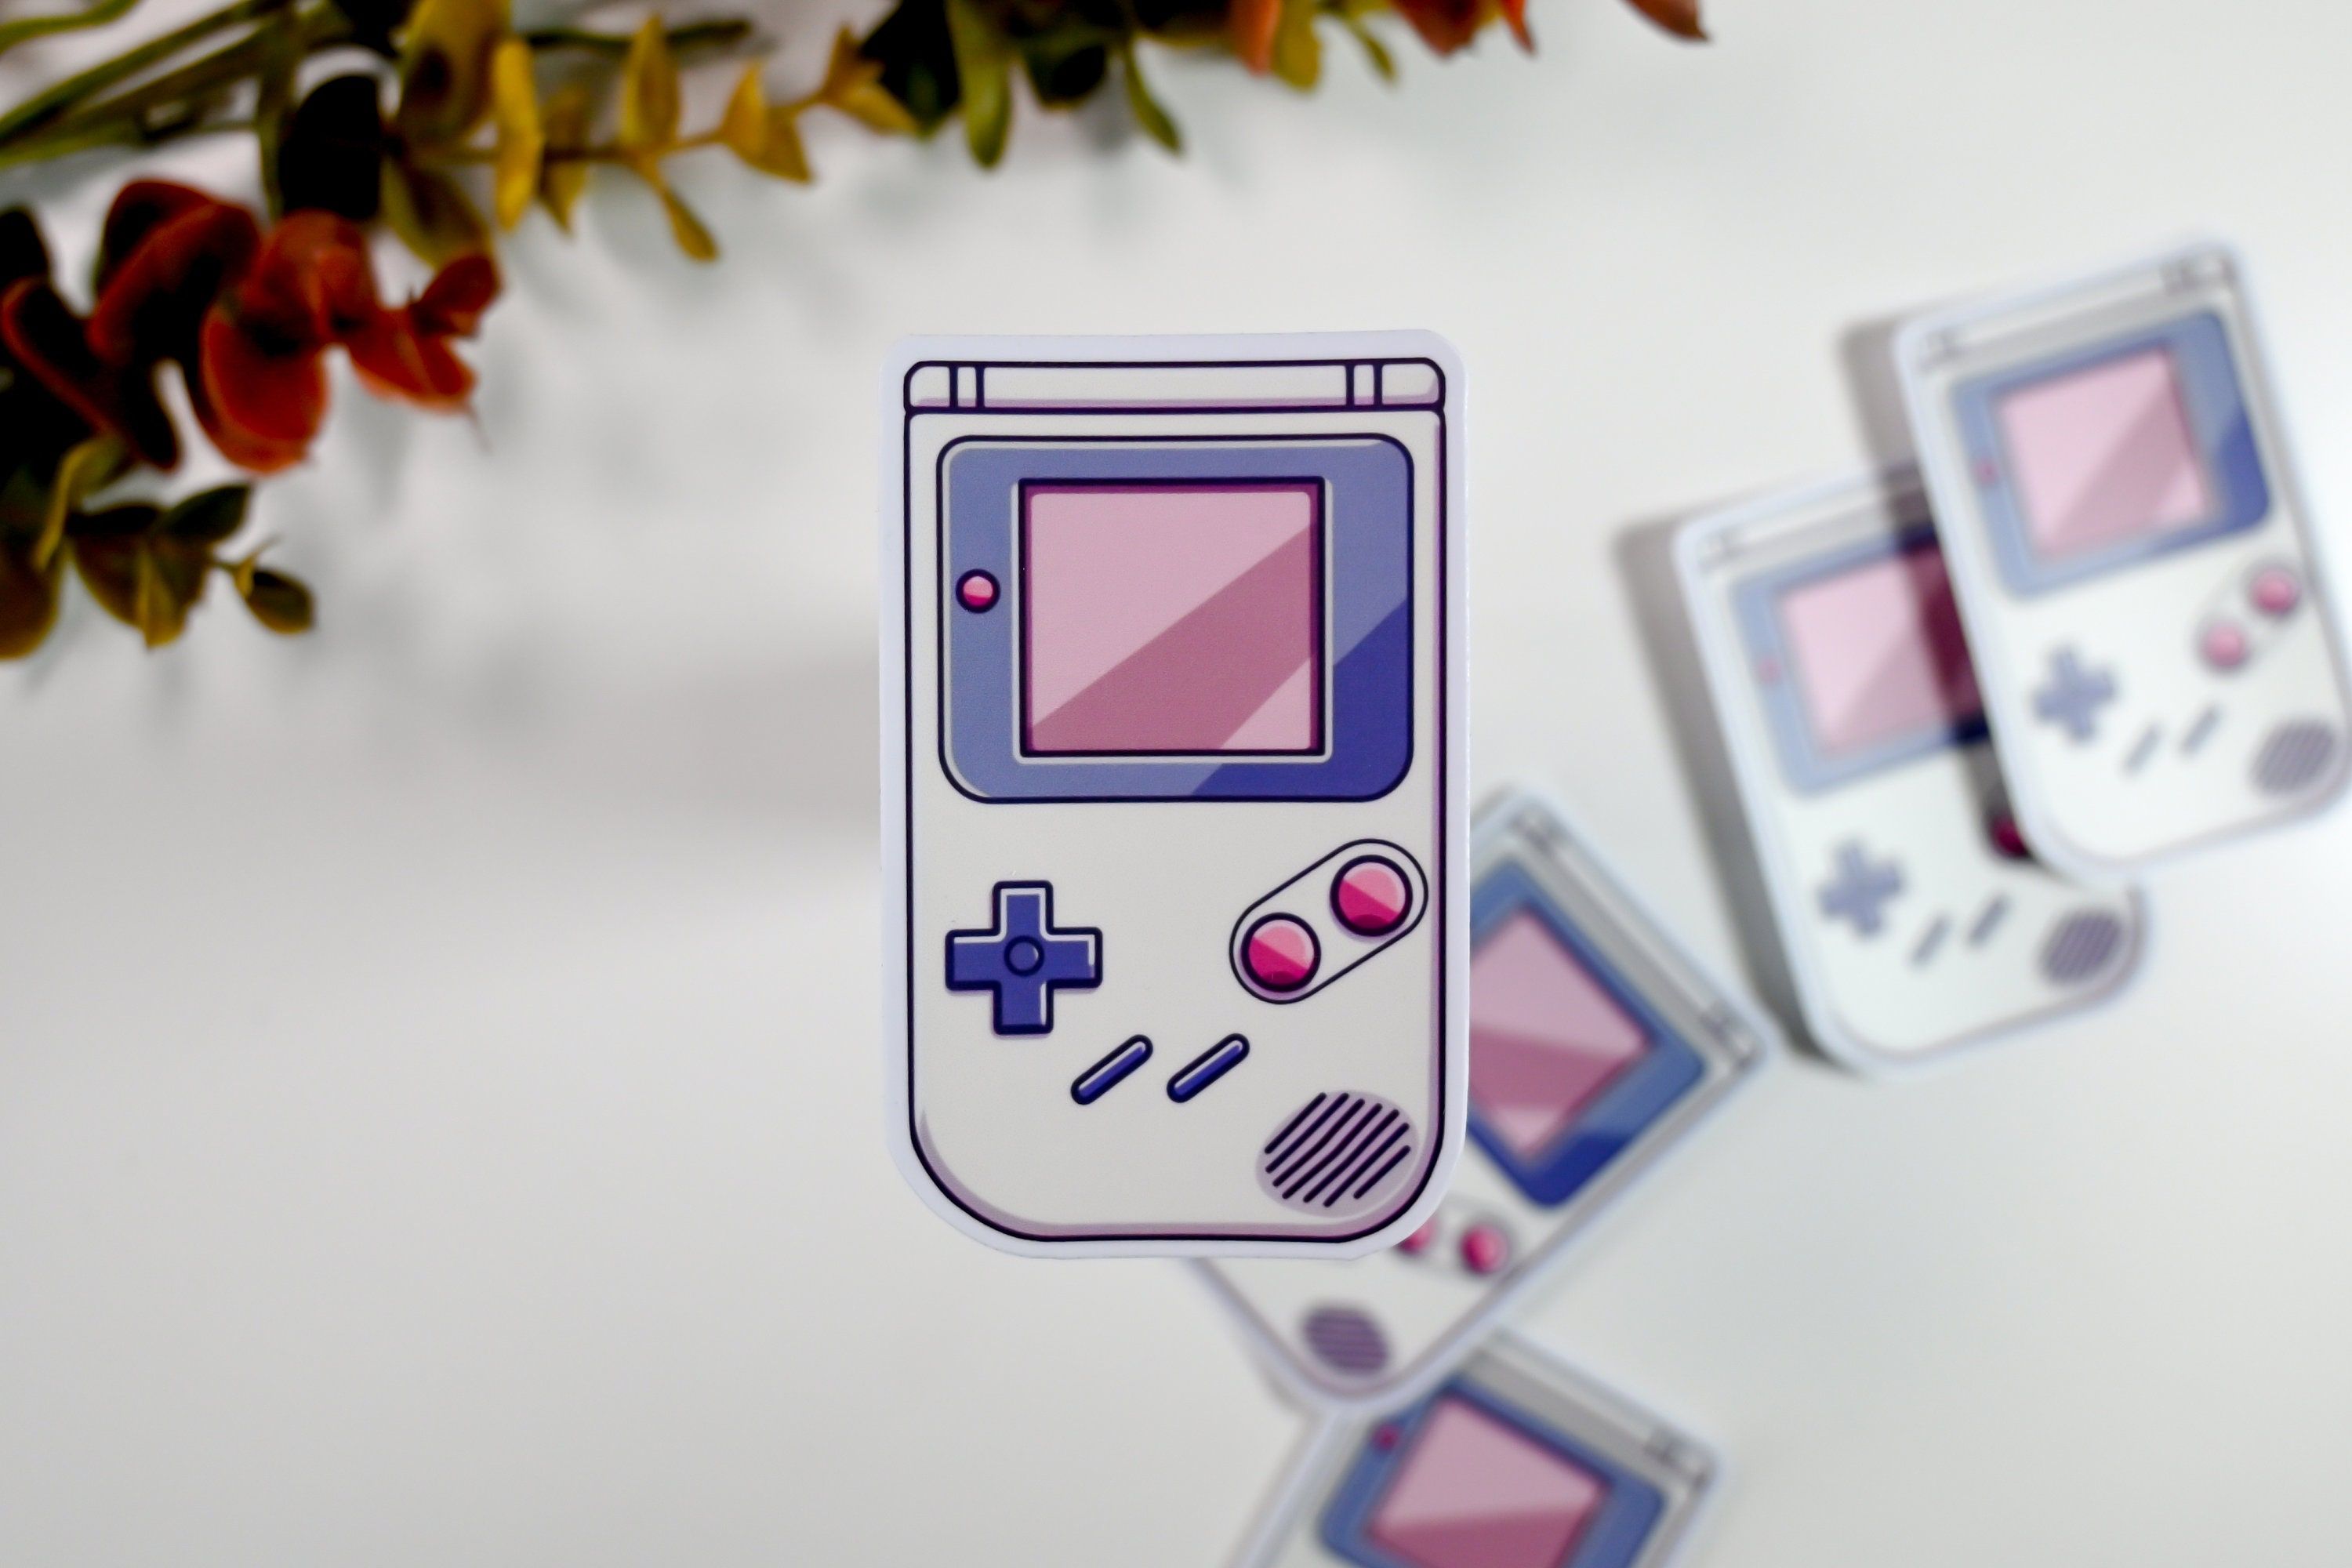 A sticker of a Gameboy console in purple and blue. - Game Boy